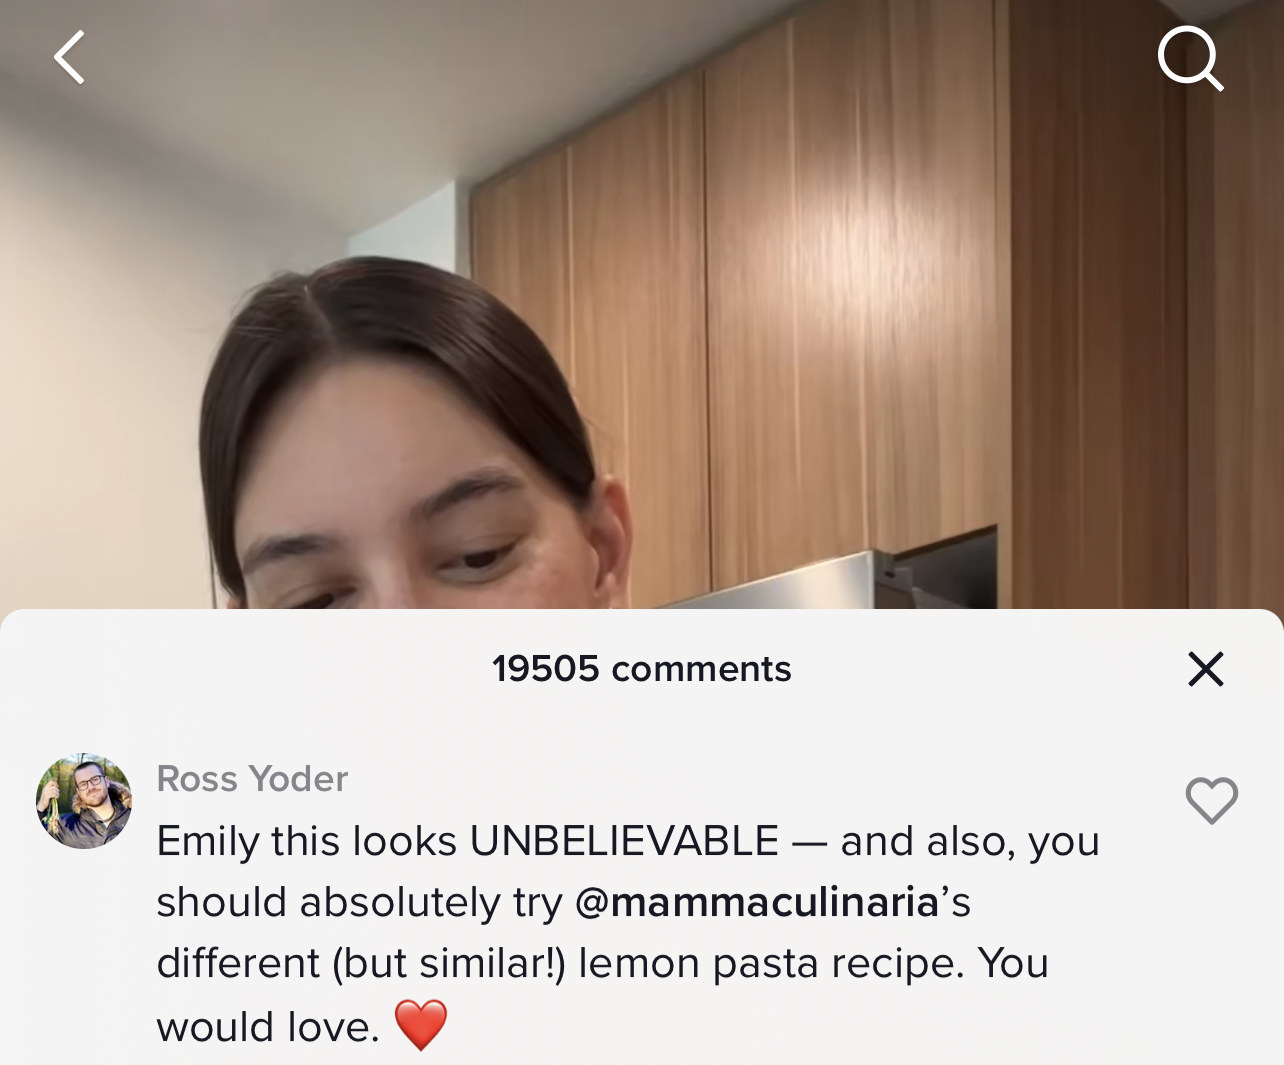 Ross Yoder&#x27;s comment: Emily this looks UNBELIEVABLE — and also, you should absolutely try @mammaculinaria&#x27;s different (but similar!) lemon pasta recipe; you would love&quot;